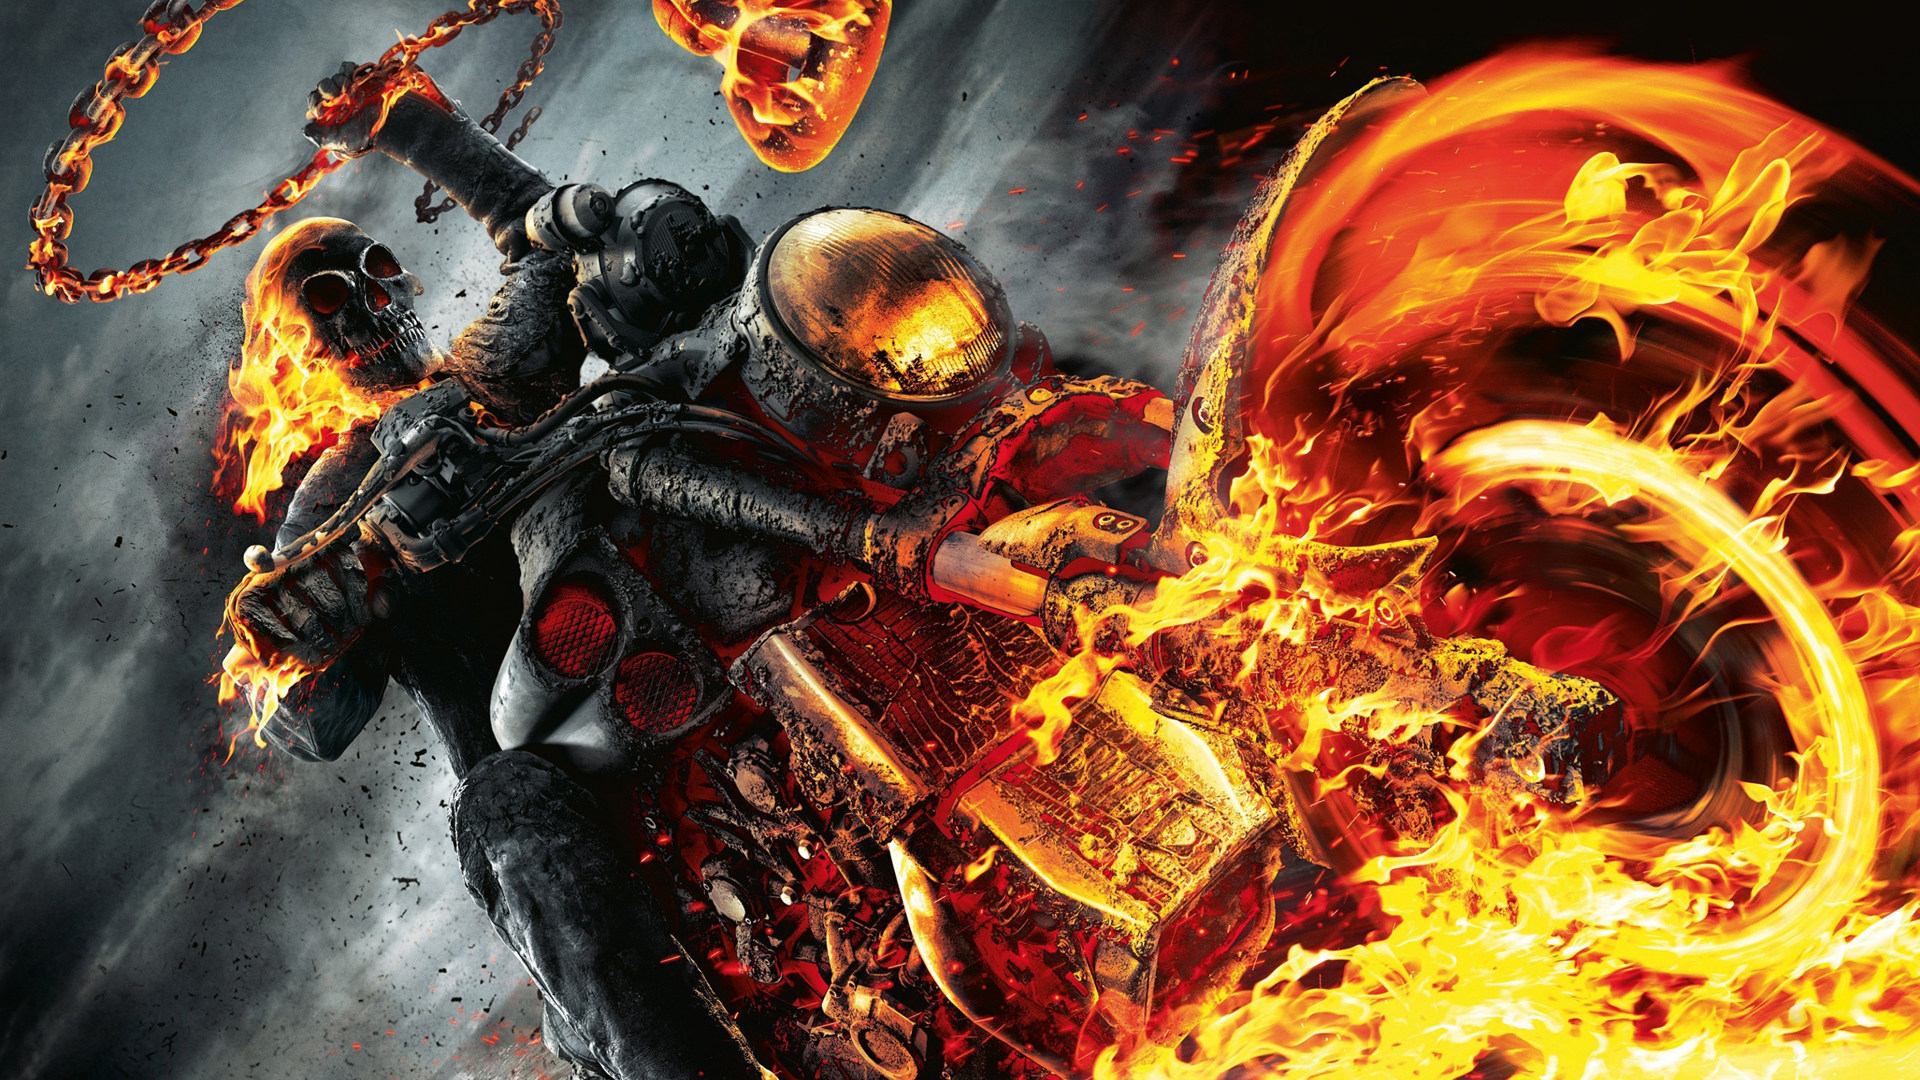 Blue ghost rider wallpaper by Thegeorgiacobra  Download on ZEDGE  ecfe